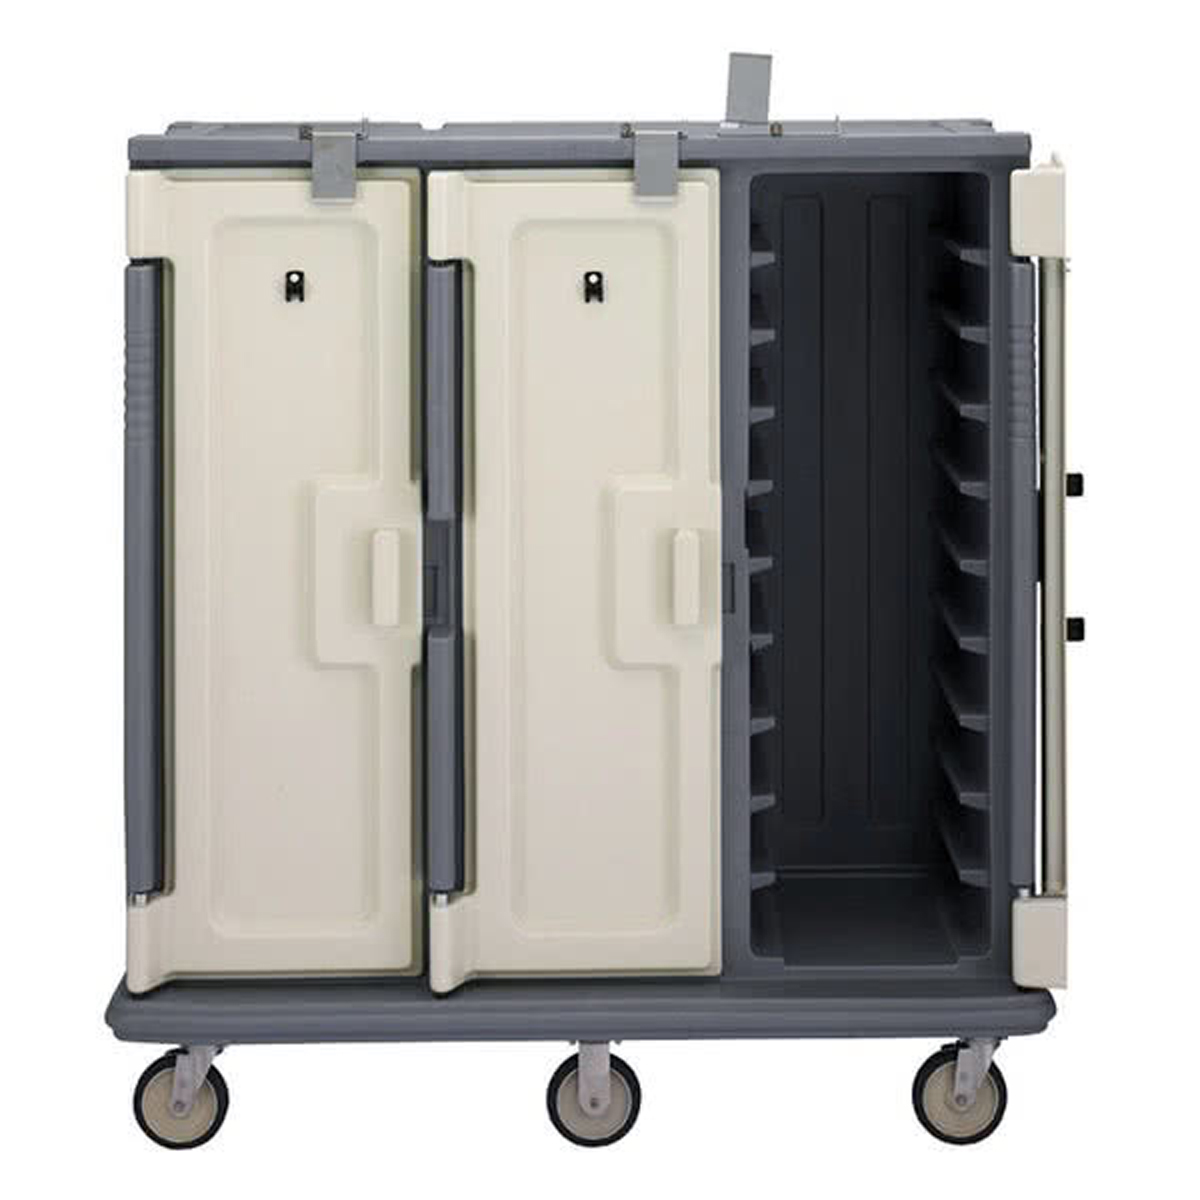 Cambro MDC1418T30191 Meal-Delivery Cart for Tray Service, 3 Compartments for 14'' x 18'' Trays, Tall - Granite Gray w/Cream Door